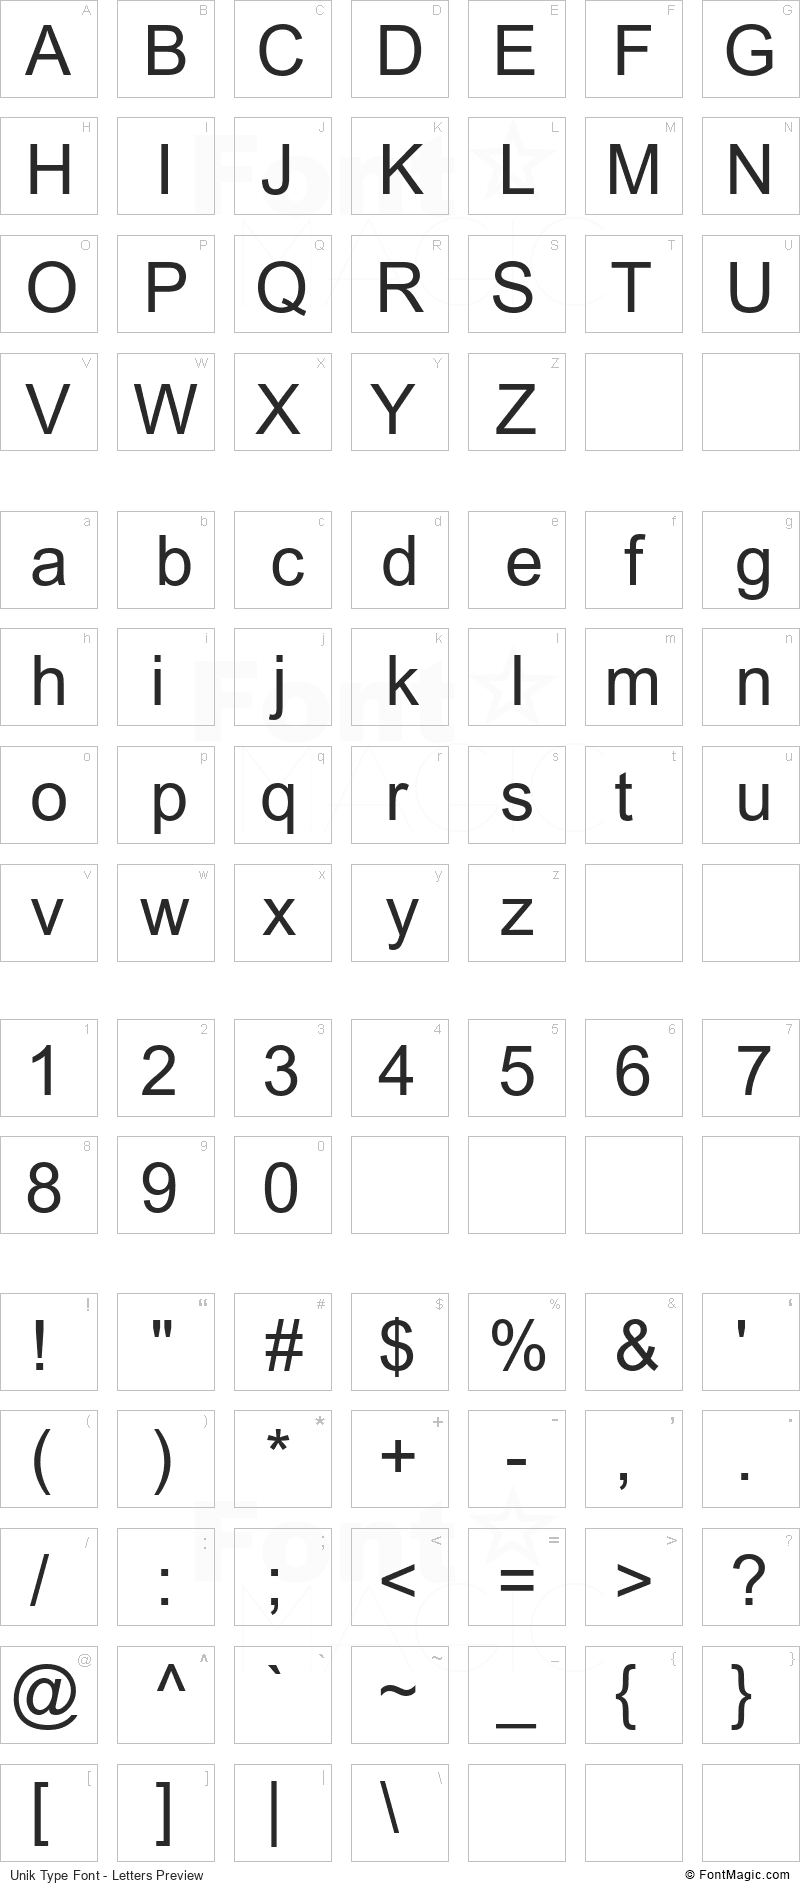 Unik Type Font - All Latters Preview Chart